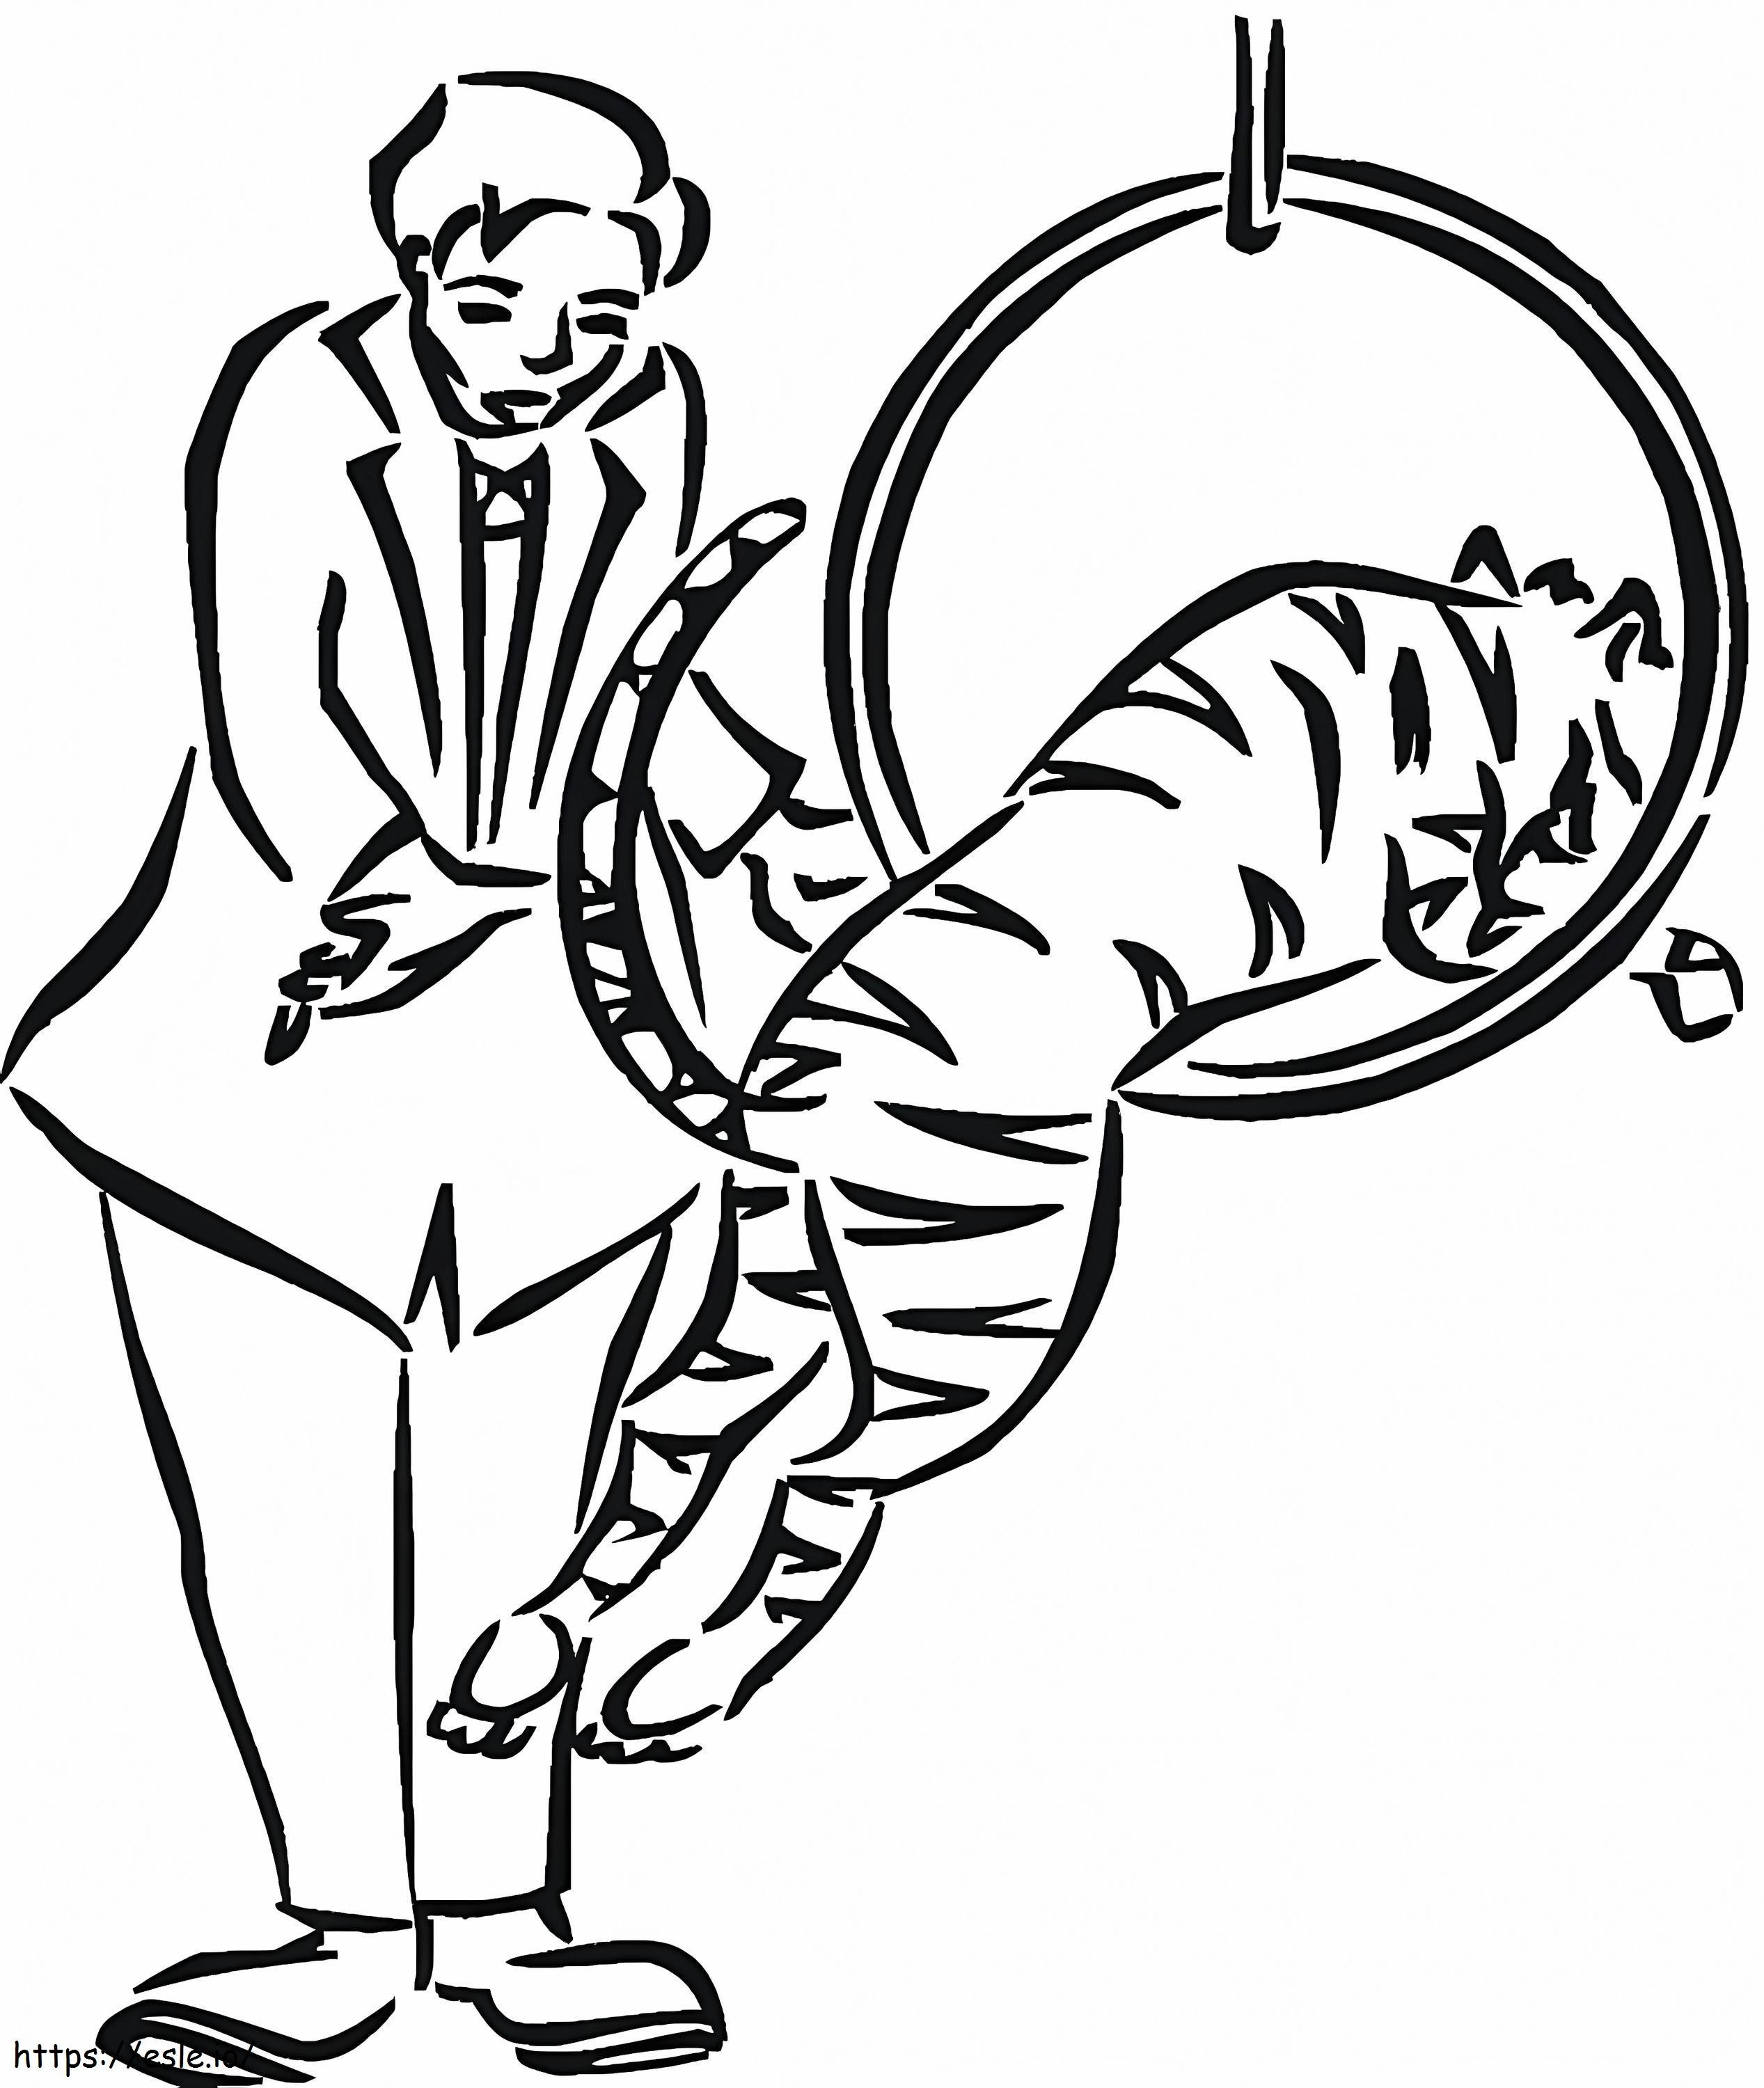 Tiger In Circus coloring page